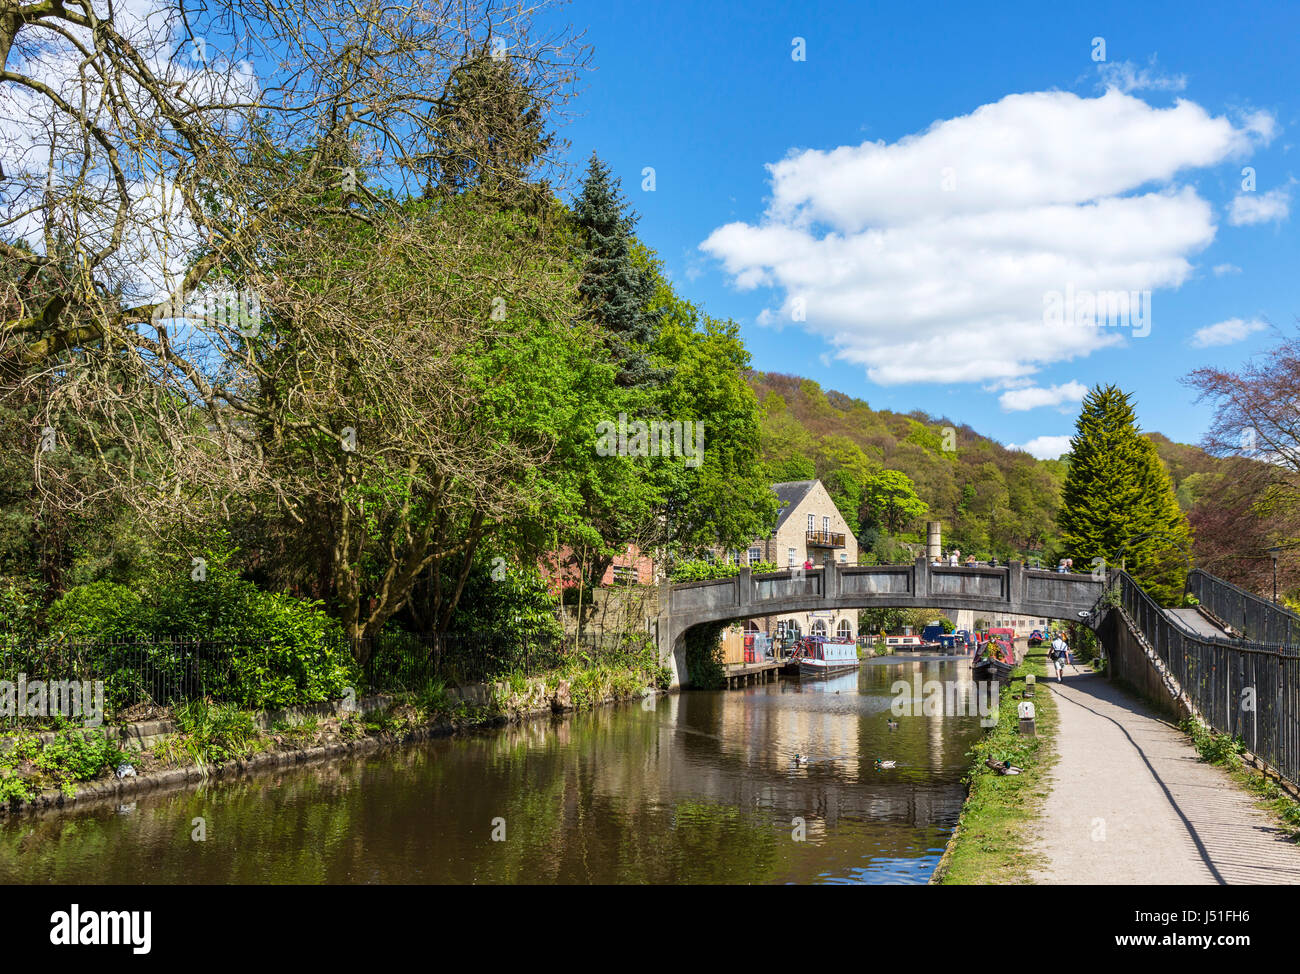 Towpath alongside the Rochdale Canal, Hebden Bridge, West Yorkshire, England, UK. Stock Photo